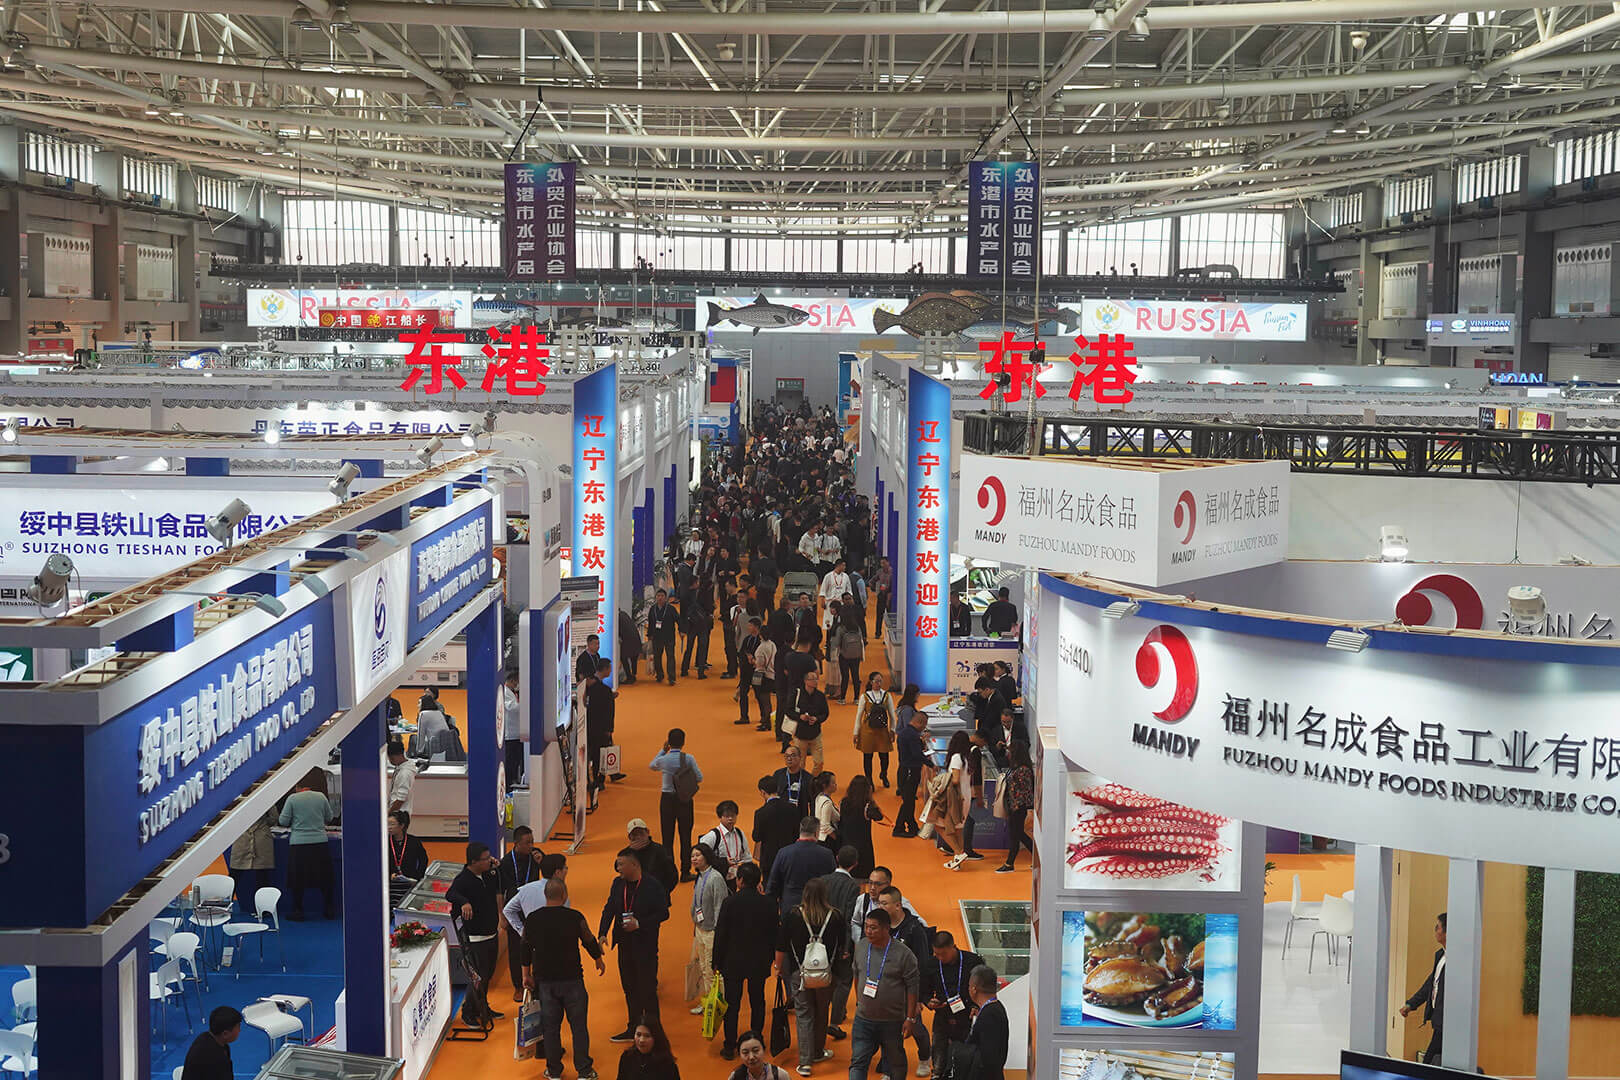 The largest in Asia event China Fisheries & Seafood Expo postponed to October 27-29, 2021